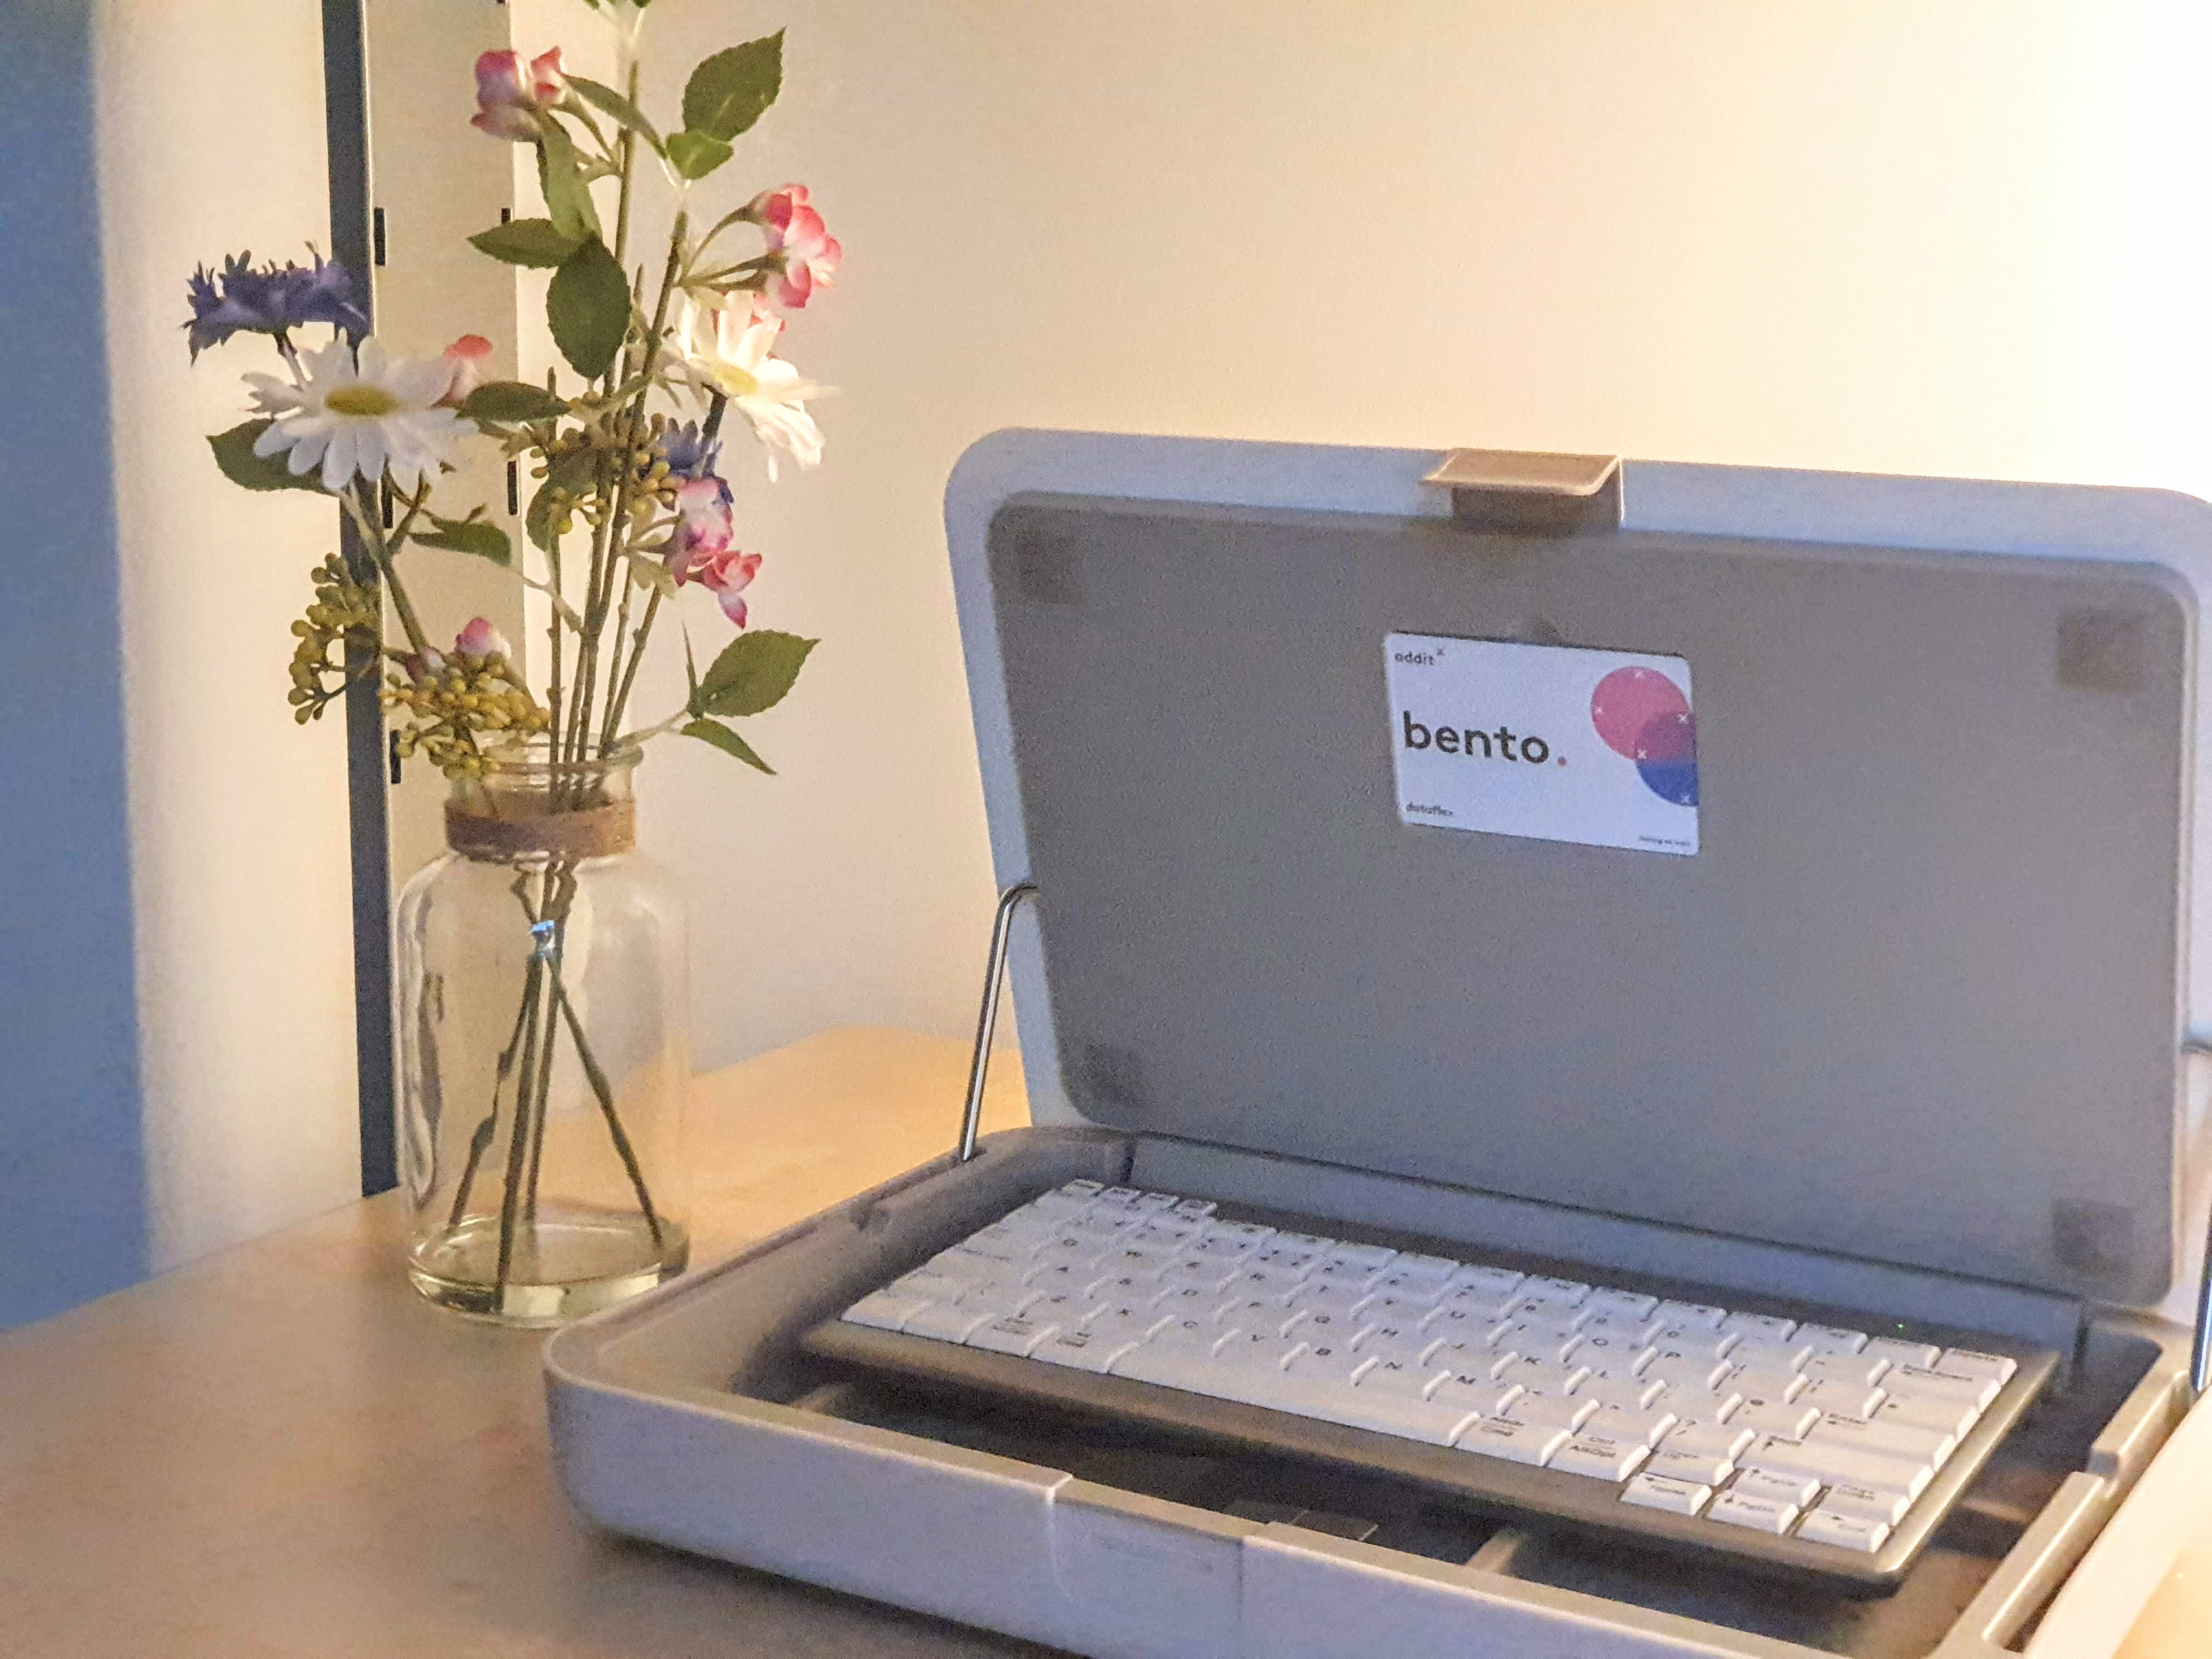 Addit Bento® Box, being used as storage for your keyboard and other office bits and bobs